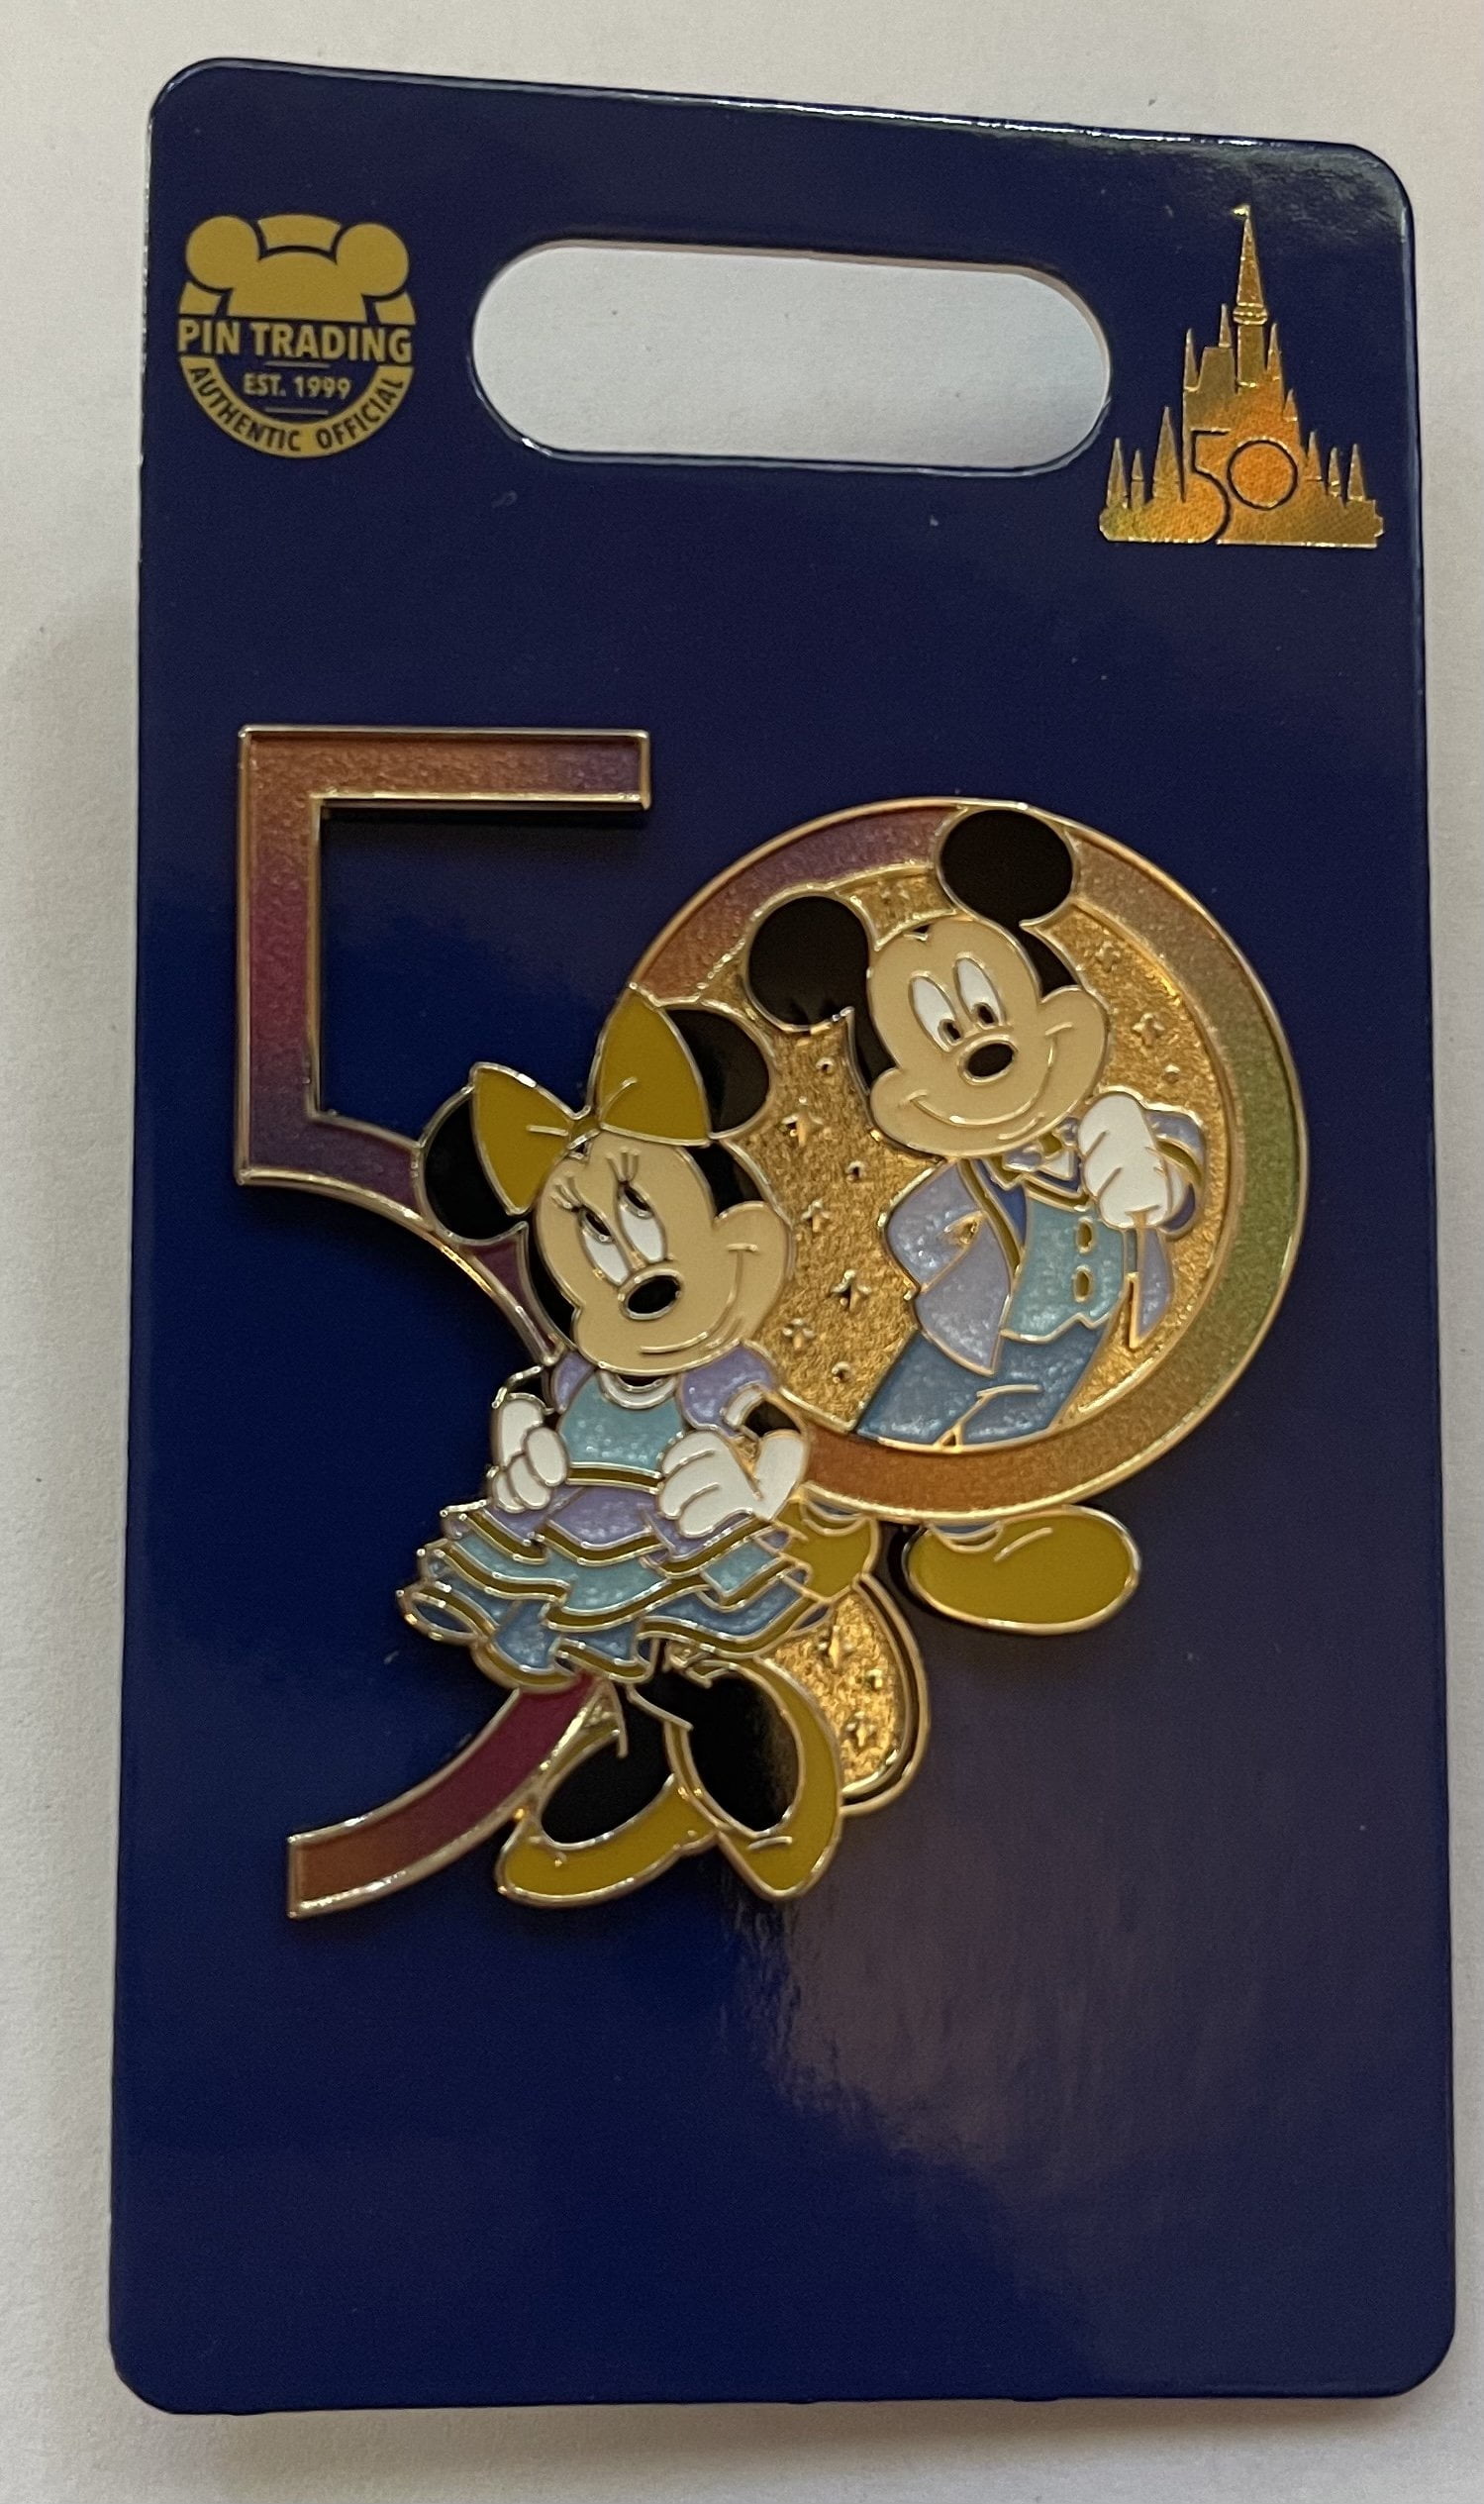 DISNEY PINS MICKEY DONALD GOOFY PLUTO BABIES SET OF 4 PINS AS SHOWN IN PACKAGE 